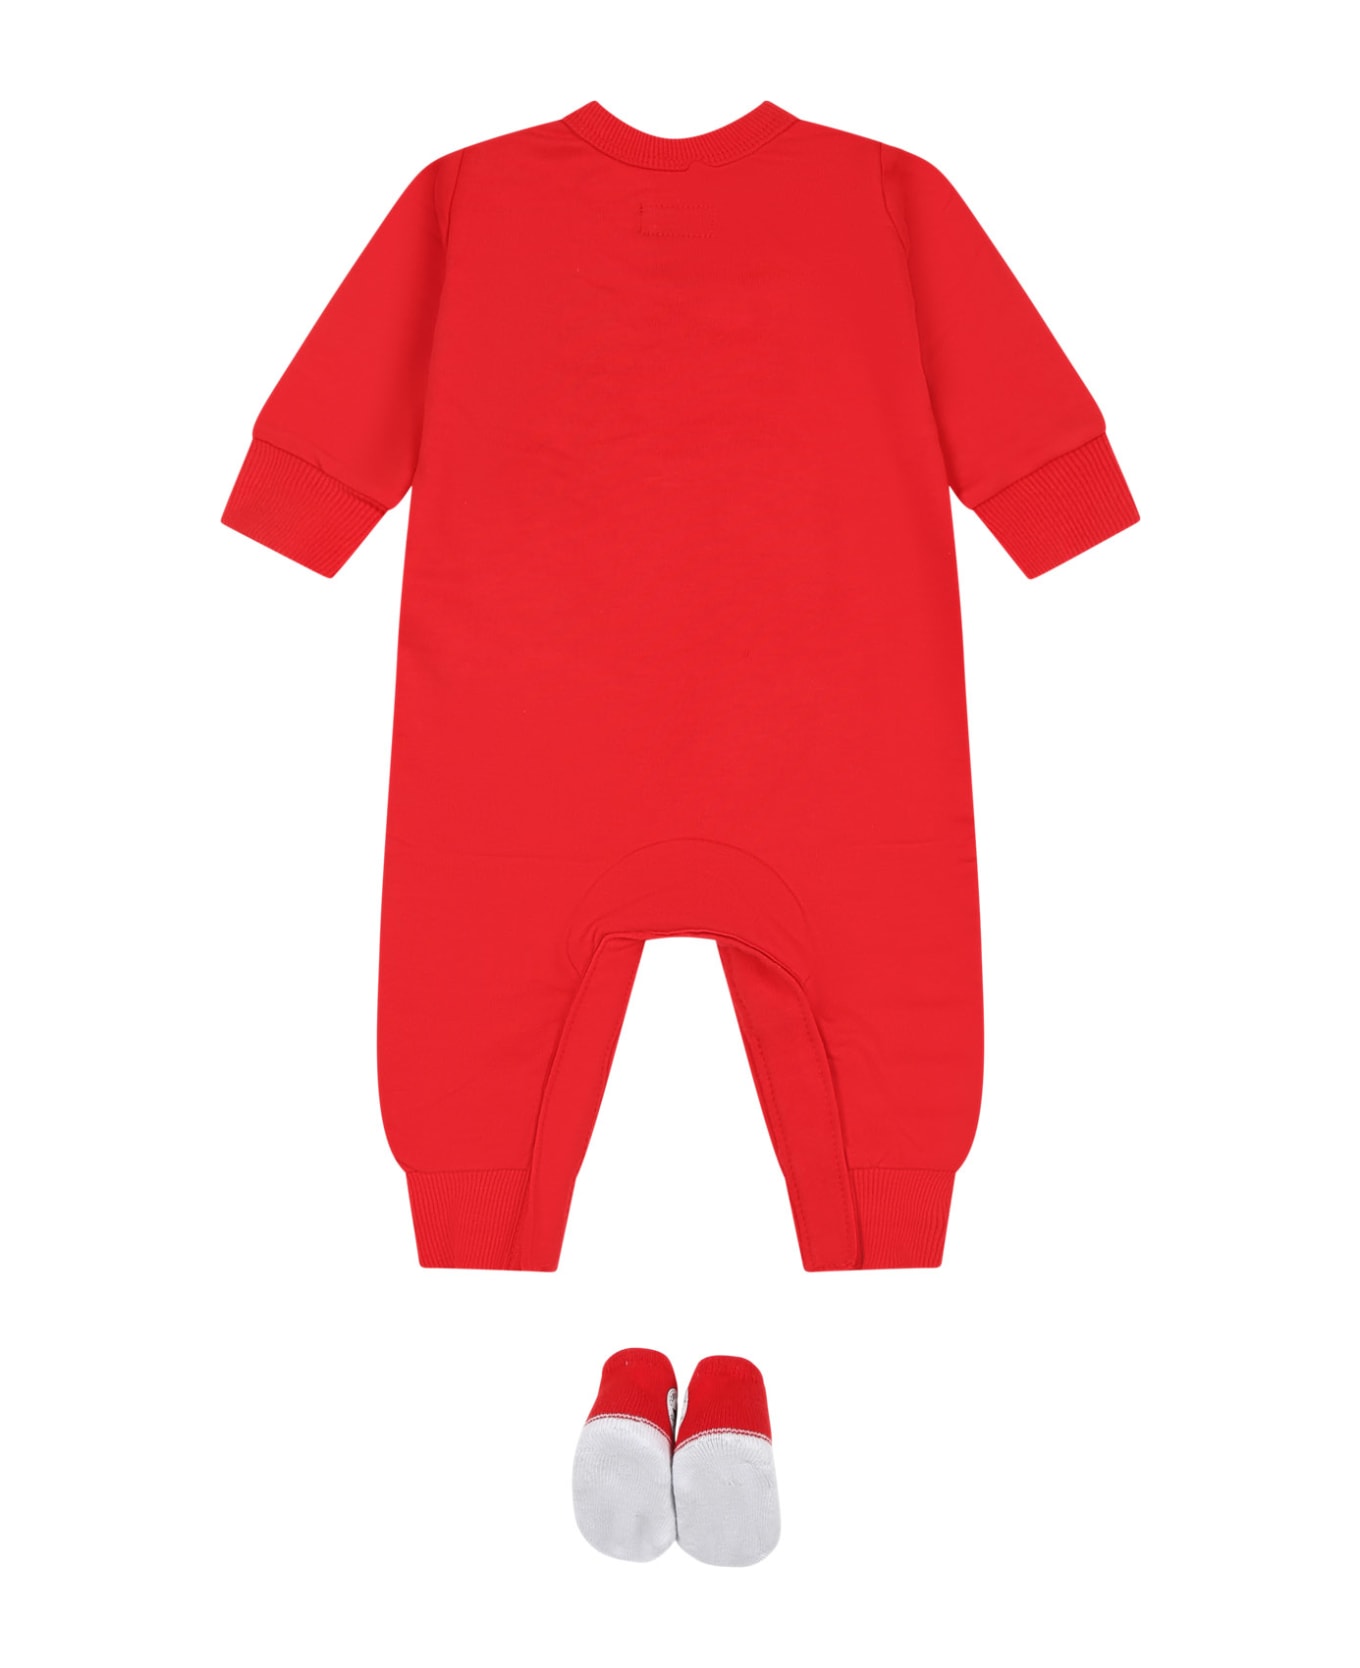 Converse Red Set For Baby Boy With Logo - Red